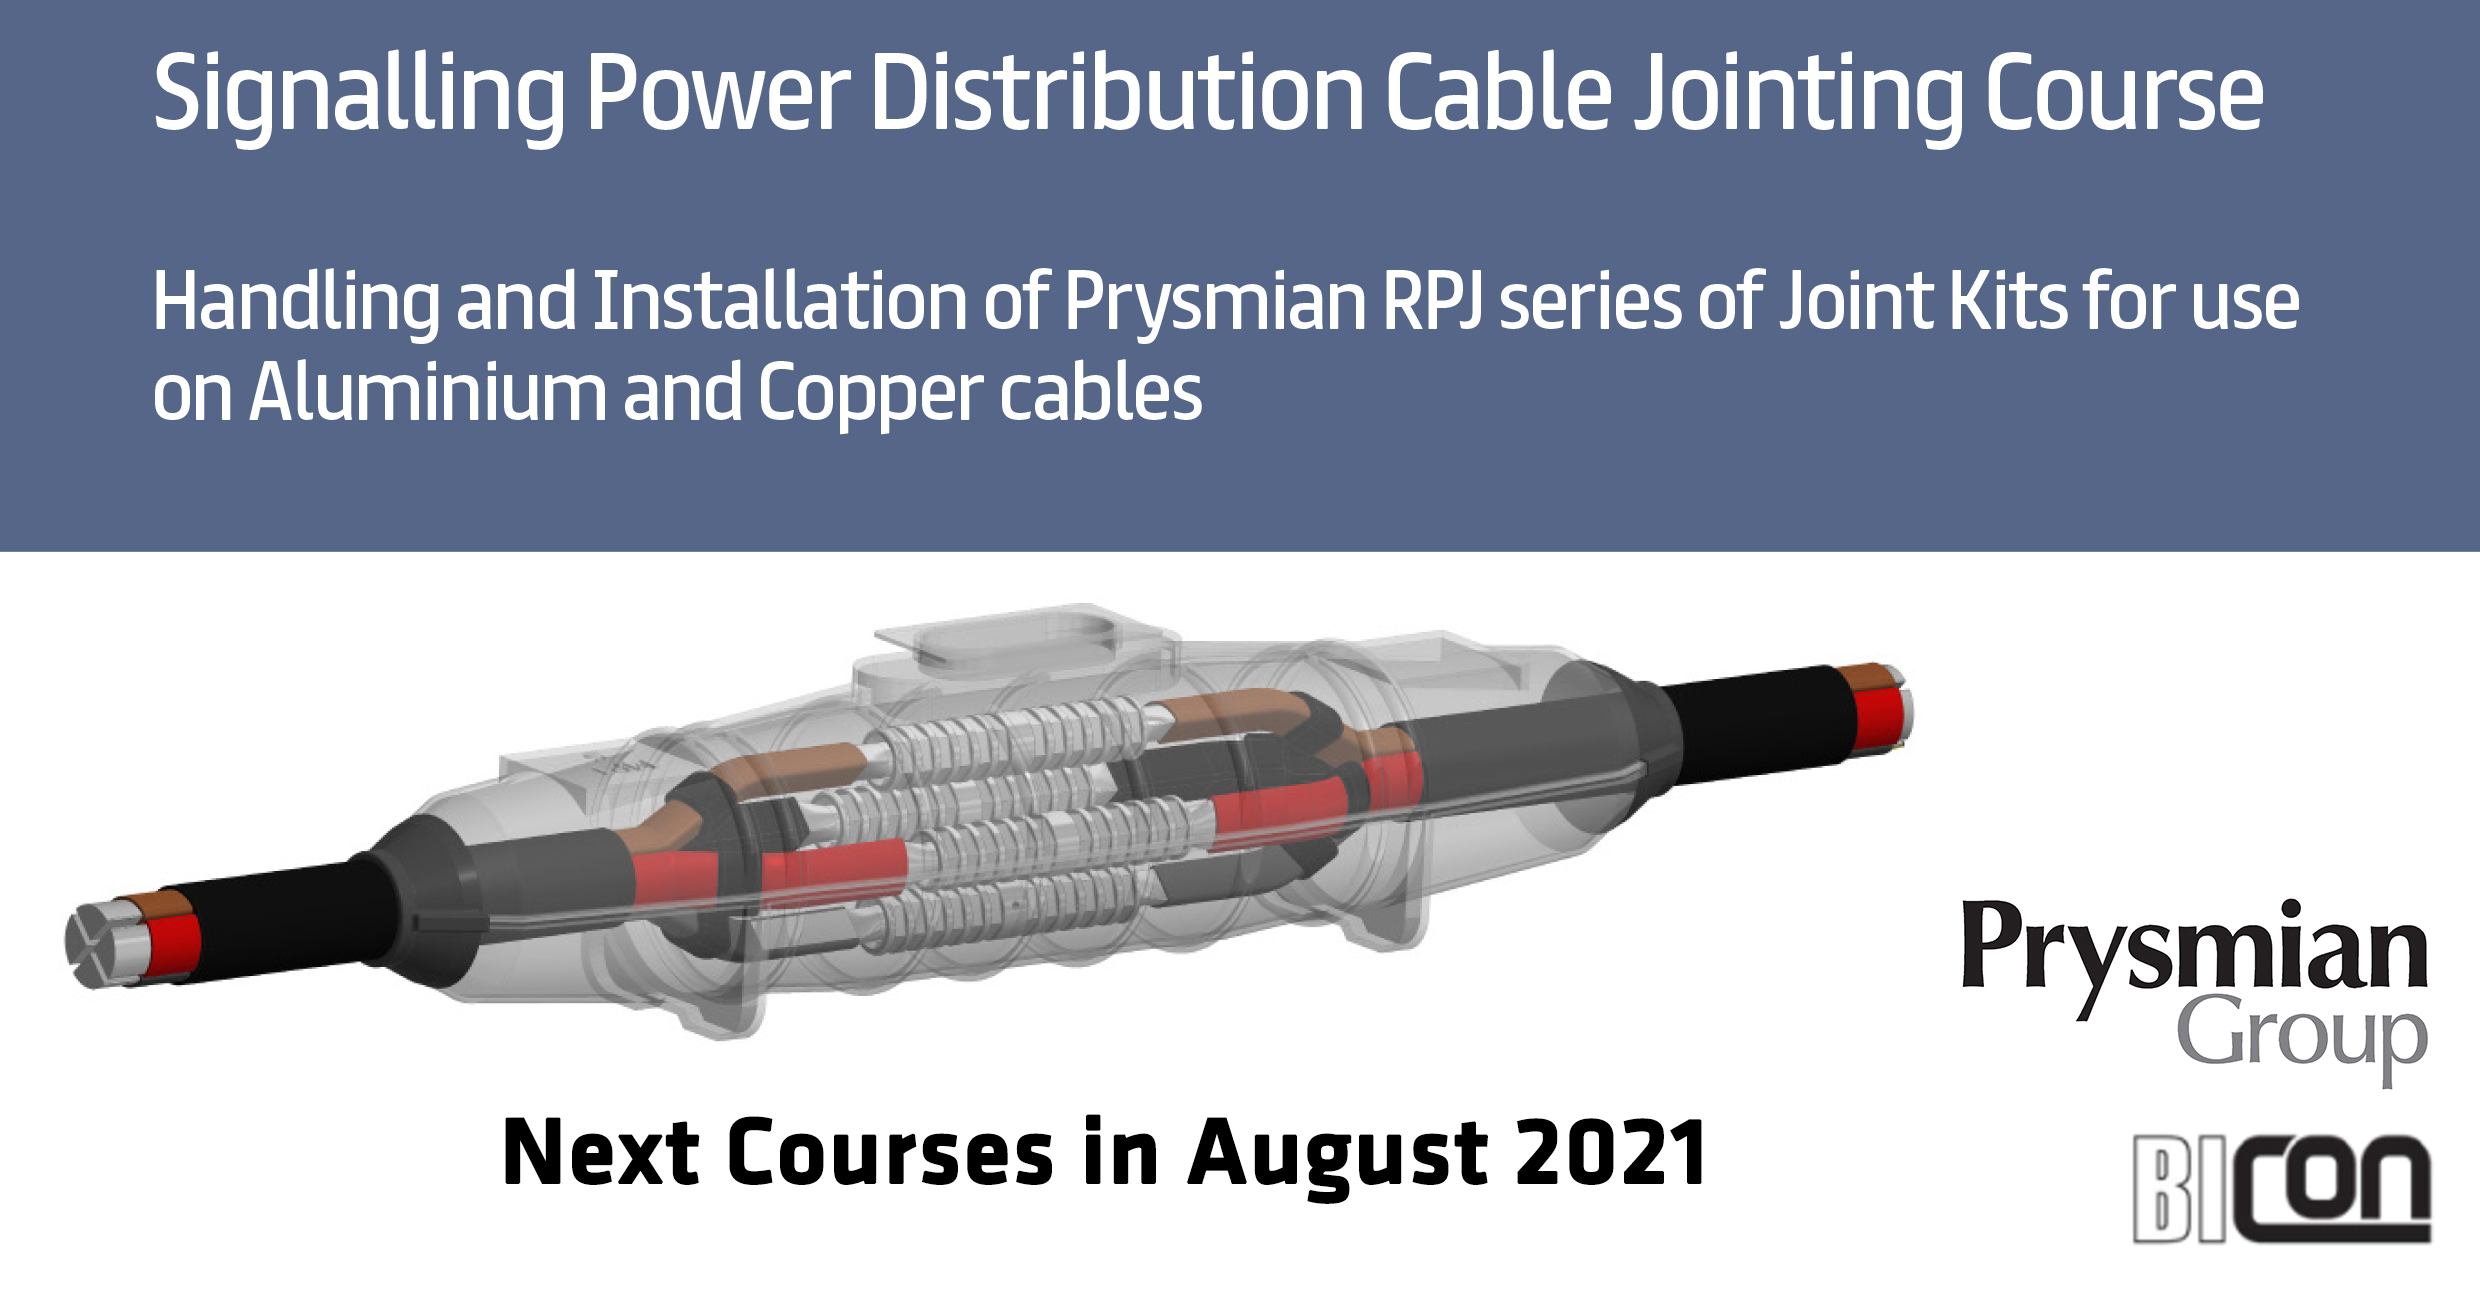 Signalling Power Distribution Cable Jointing Course by Prysmian